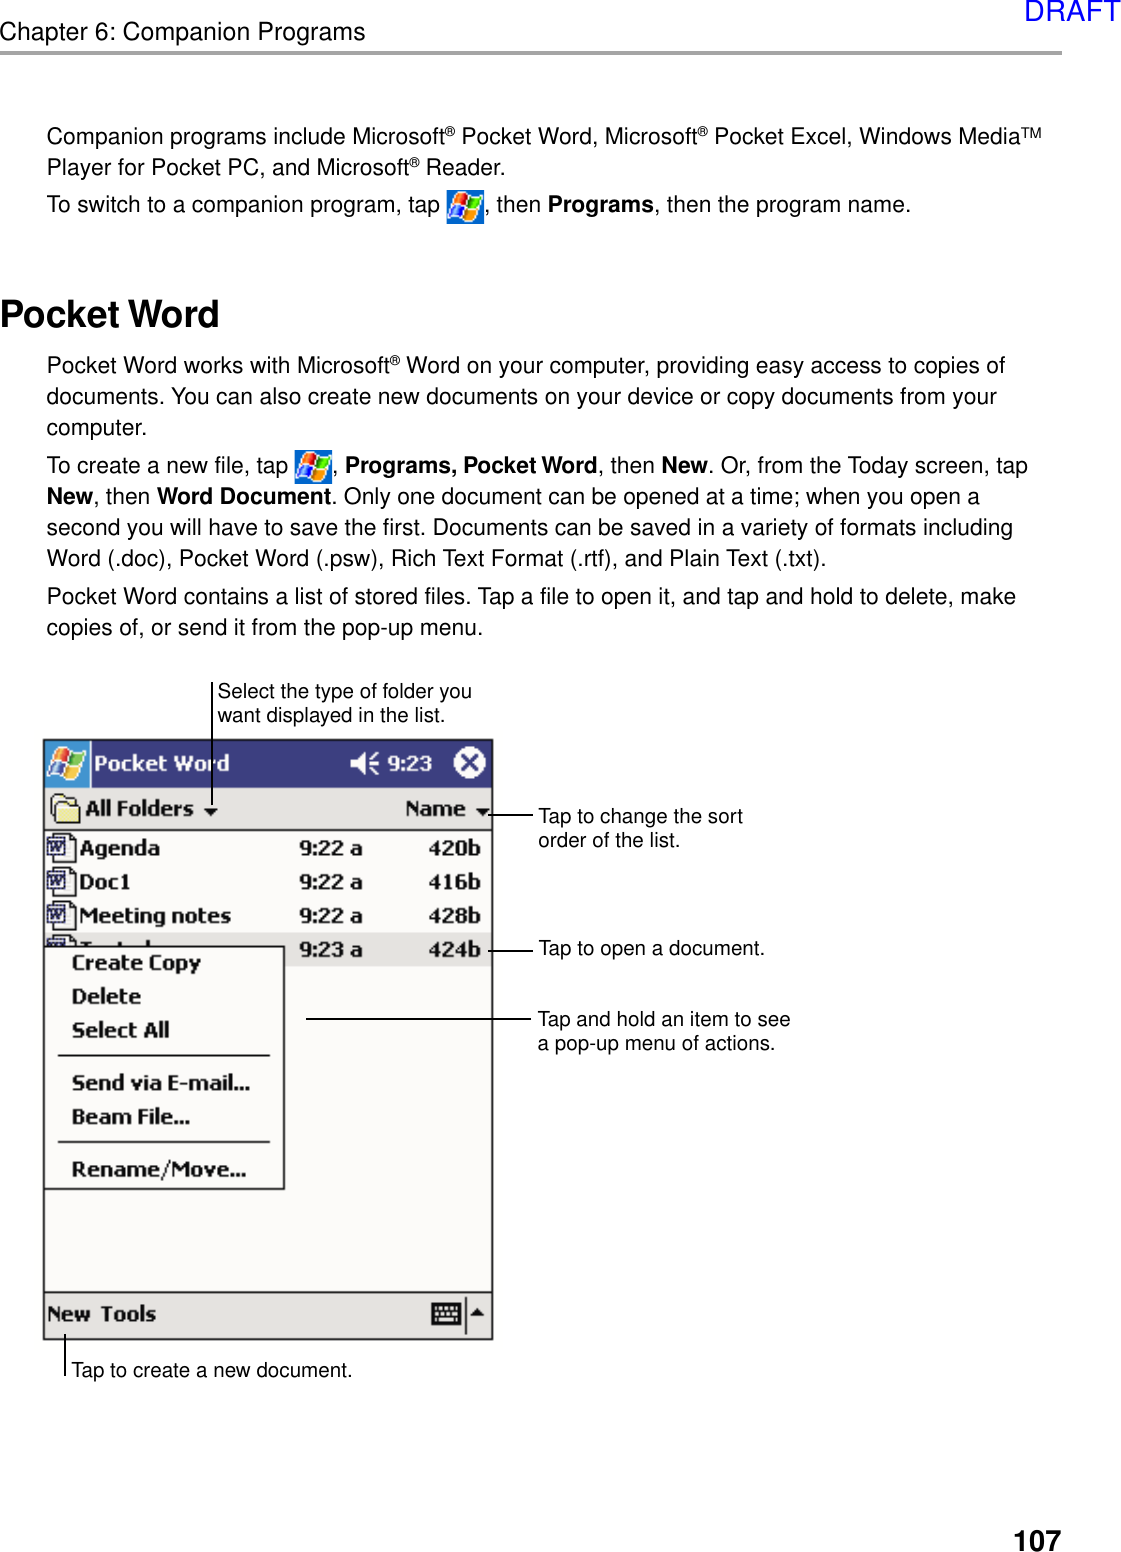 107Chapter 6: Companion ProgramsCompanion programs include Microsoft® Pocket Word, Microsoft® Pocket Excel, Windows MediaTMPlayer for Pocket PC, and Microsoft® Reader.To switch to a companion program, tap  , then Programs, then the program name.Pocket WordPocket Word works with Microsoft® Word on your computer, providing easy access to copies ofdocuments. You can also create new documents on your device or copy documents from yourcomputer.To create a new file, tap  , Programs, Pocket Word, then New. Or, from the Today screen, tapNew, then Word Document. Only one document can be opened at a time; when you open asecond you will have to save the first. Documents can be saved in a variety of formats includingWord (.doc), Pocket Word (.psw), Rich Text Format (.rtf), and Plain Text (.txt).Pocket Word contains a list of stored files. Tap a file to open it, and tap and hold to delete, makecopies of, or send it from the pop-up menu.Tap to change the sortorder of the list.Tap to open a document.Tap and hold an item to seea pop-up menu of actions.Tap to create a new document.Select the type of folder youwant displayed in the list.DRAFT